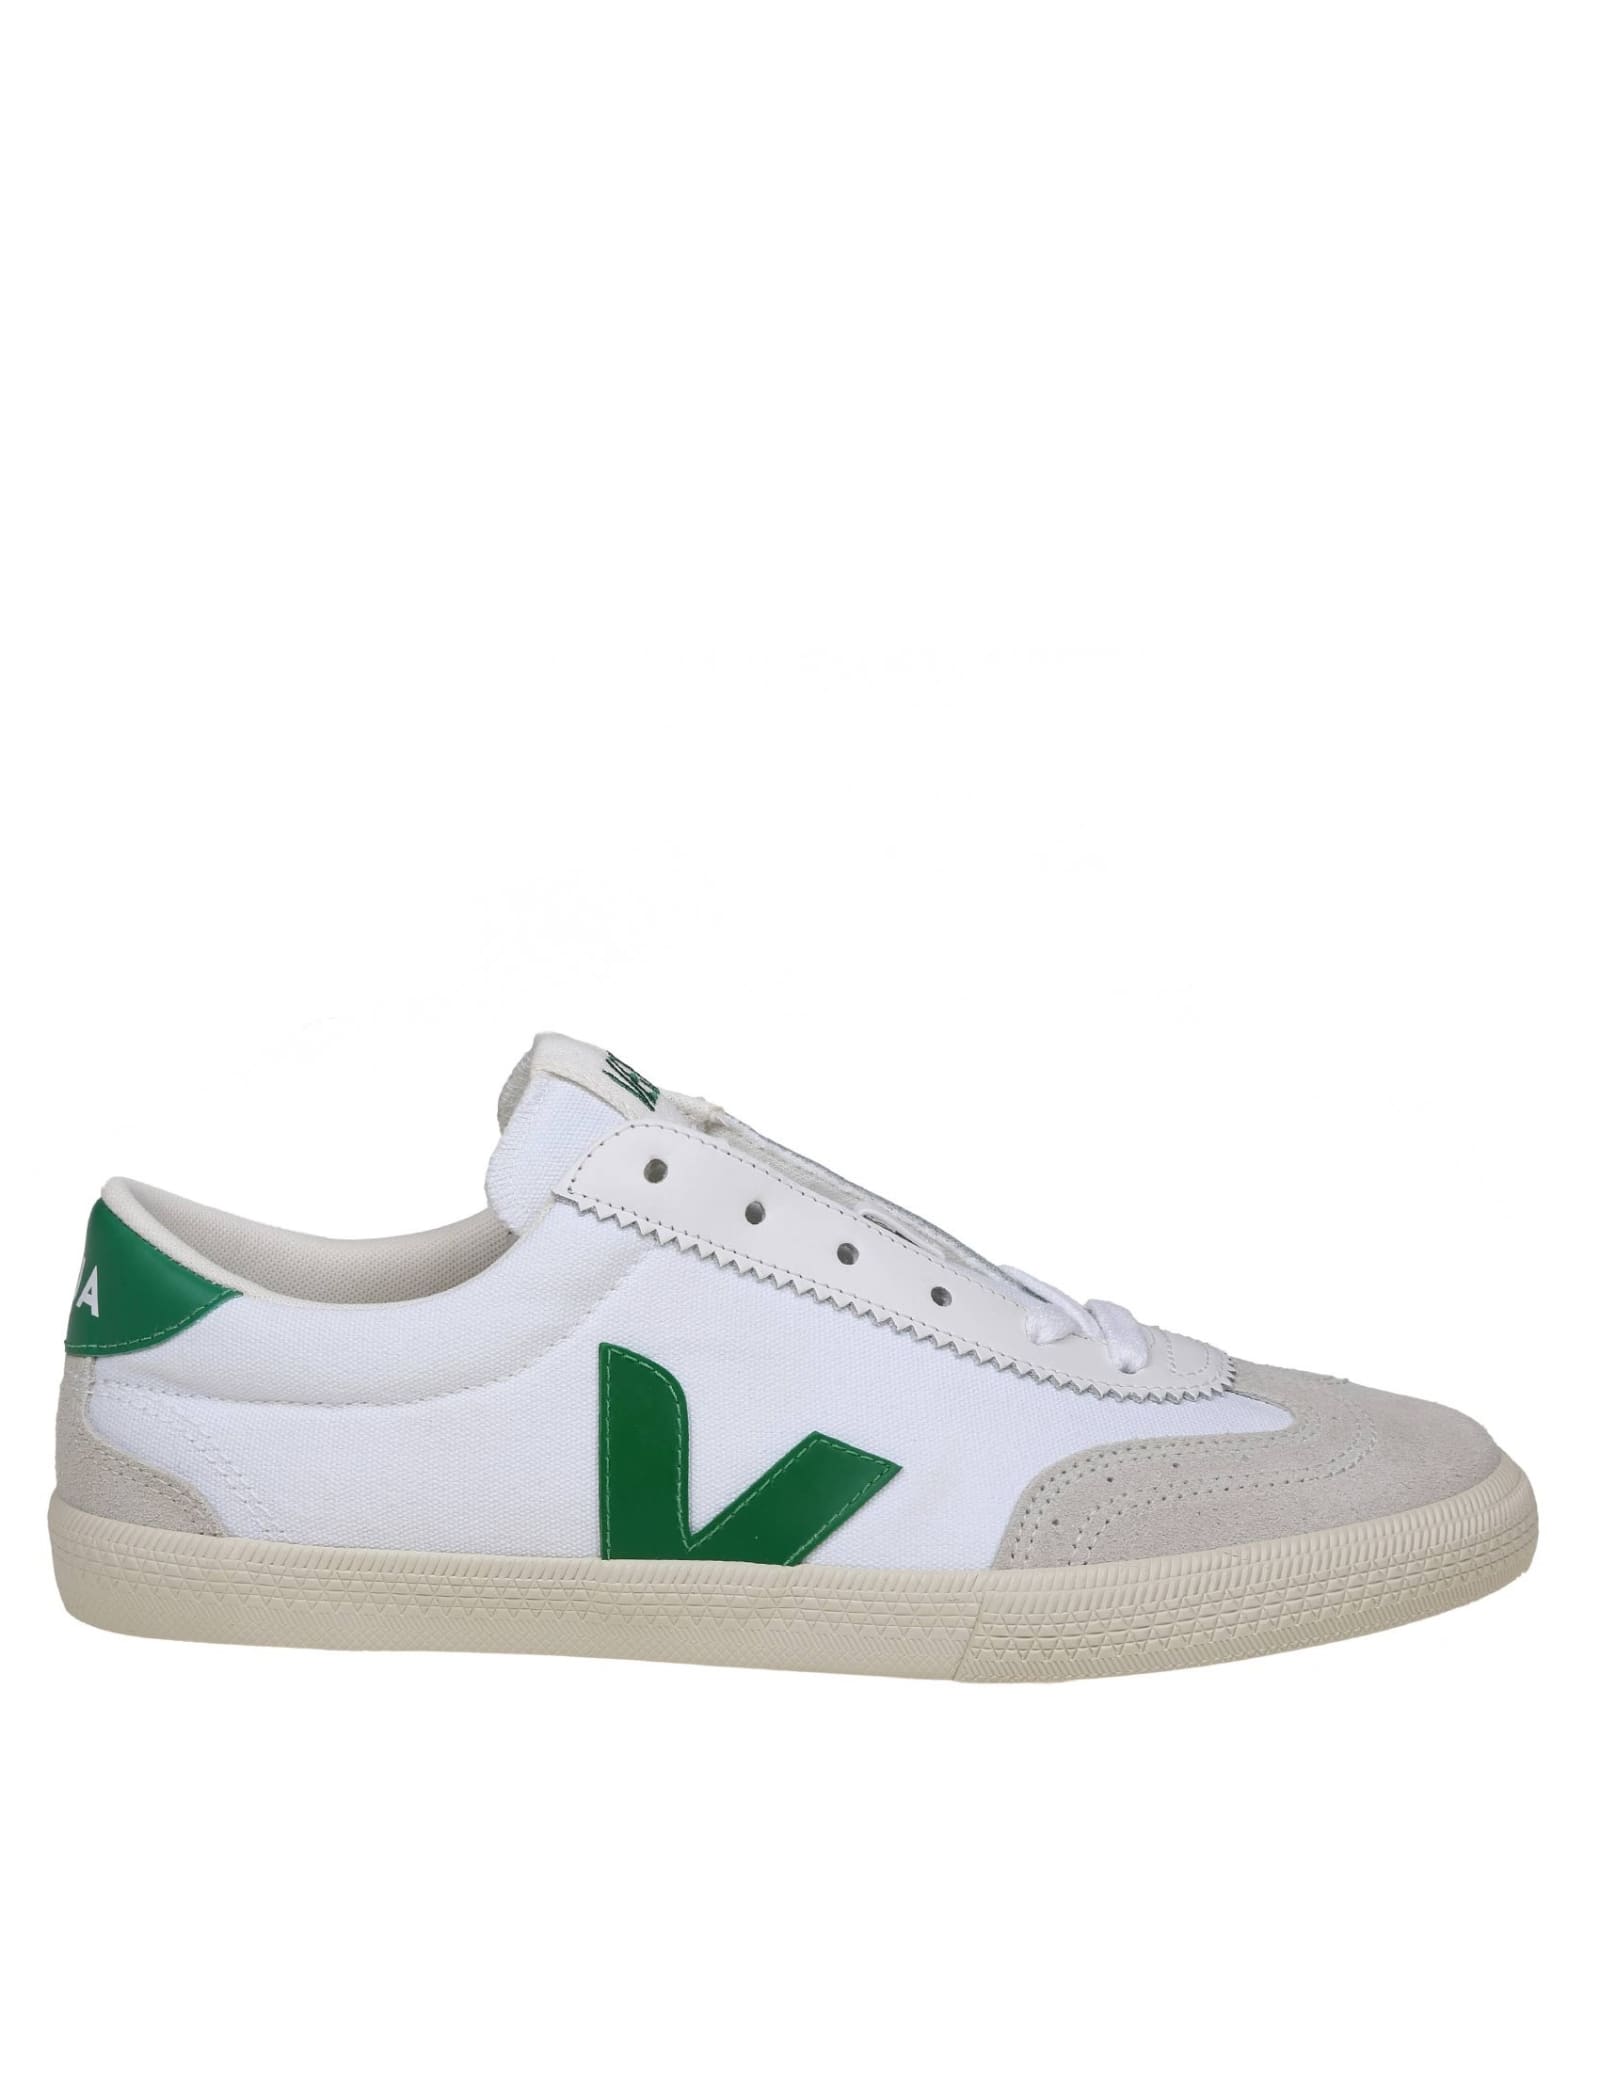 Veja Volley Sneakers In Canvas Color White/green